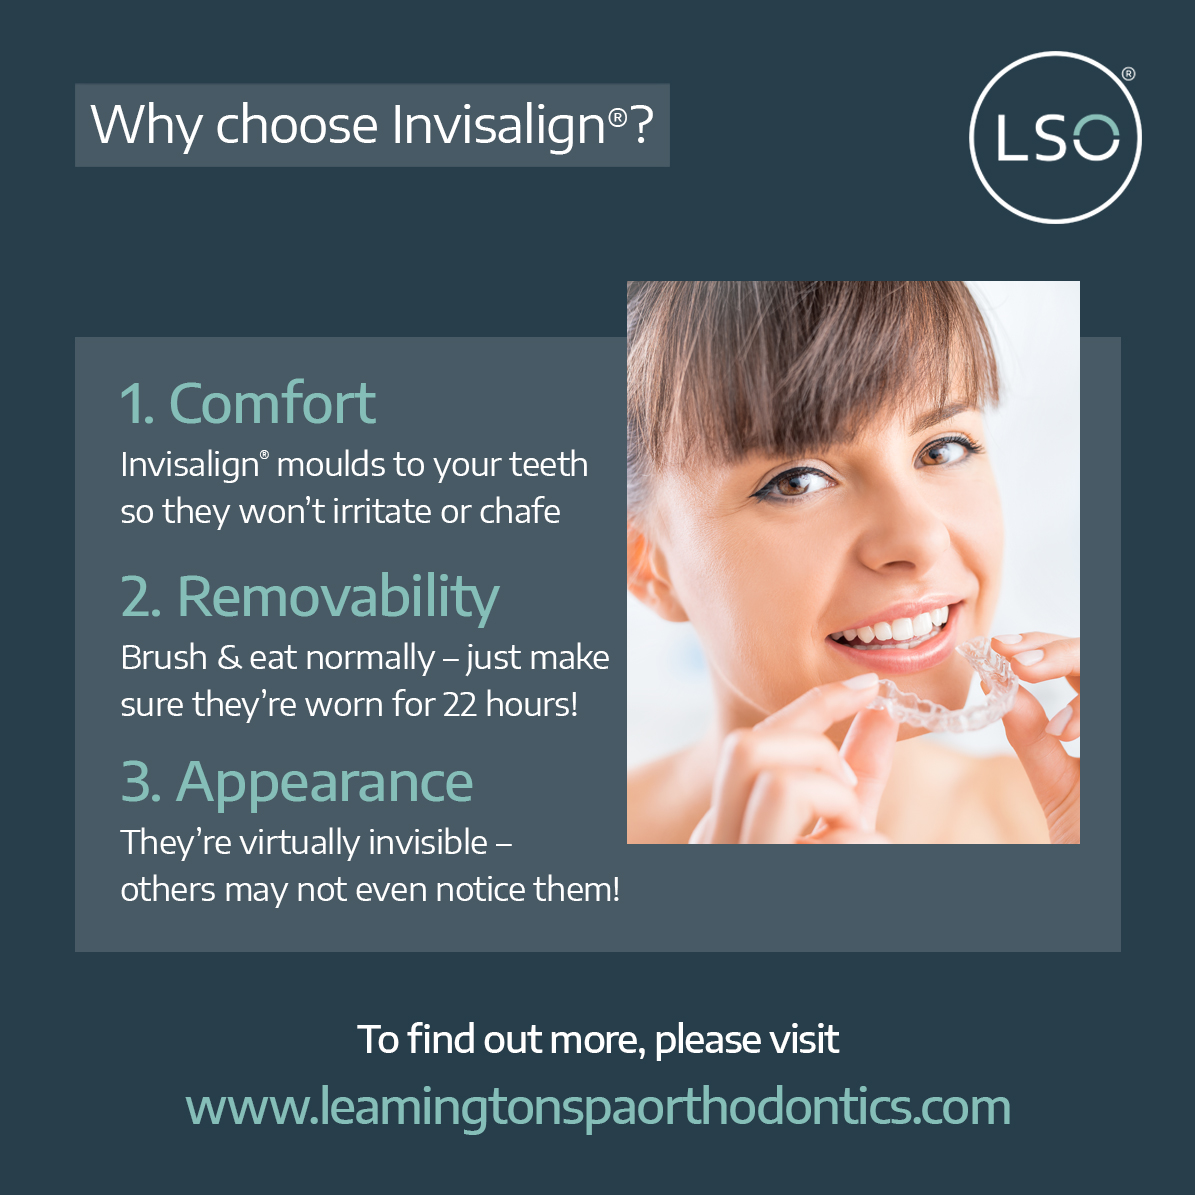 Invisalign is just one of the treatment options we offer - to discover which one is right for you, please book a consultation with us by calling 01926 883476!

#specialistorthodontist #orthodontics #leamington #leamingtonspa #invisalign #braces #orthodontictreatment #smile